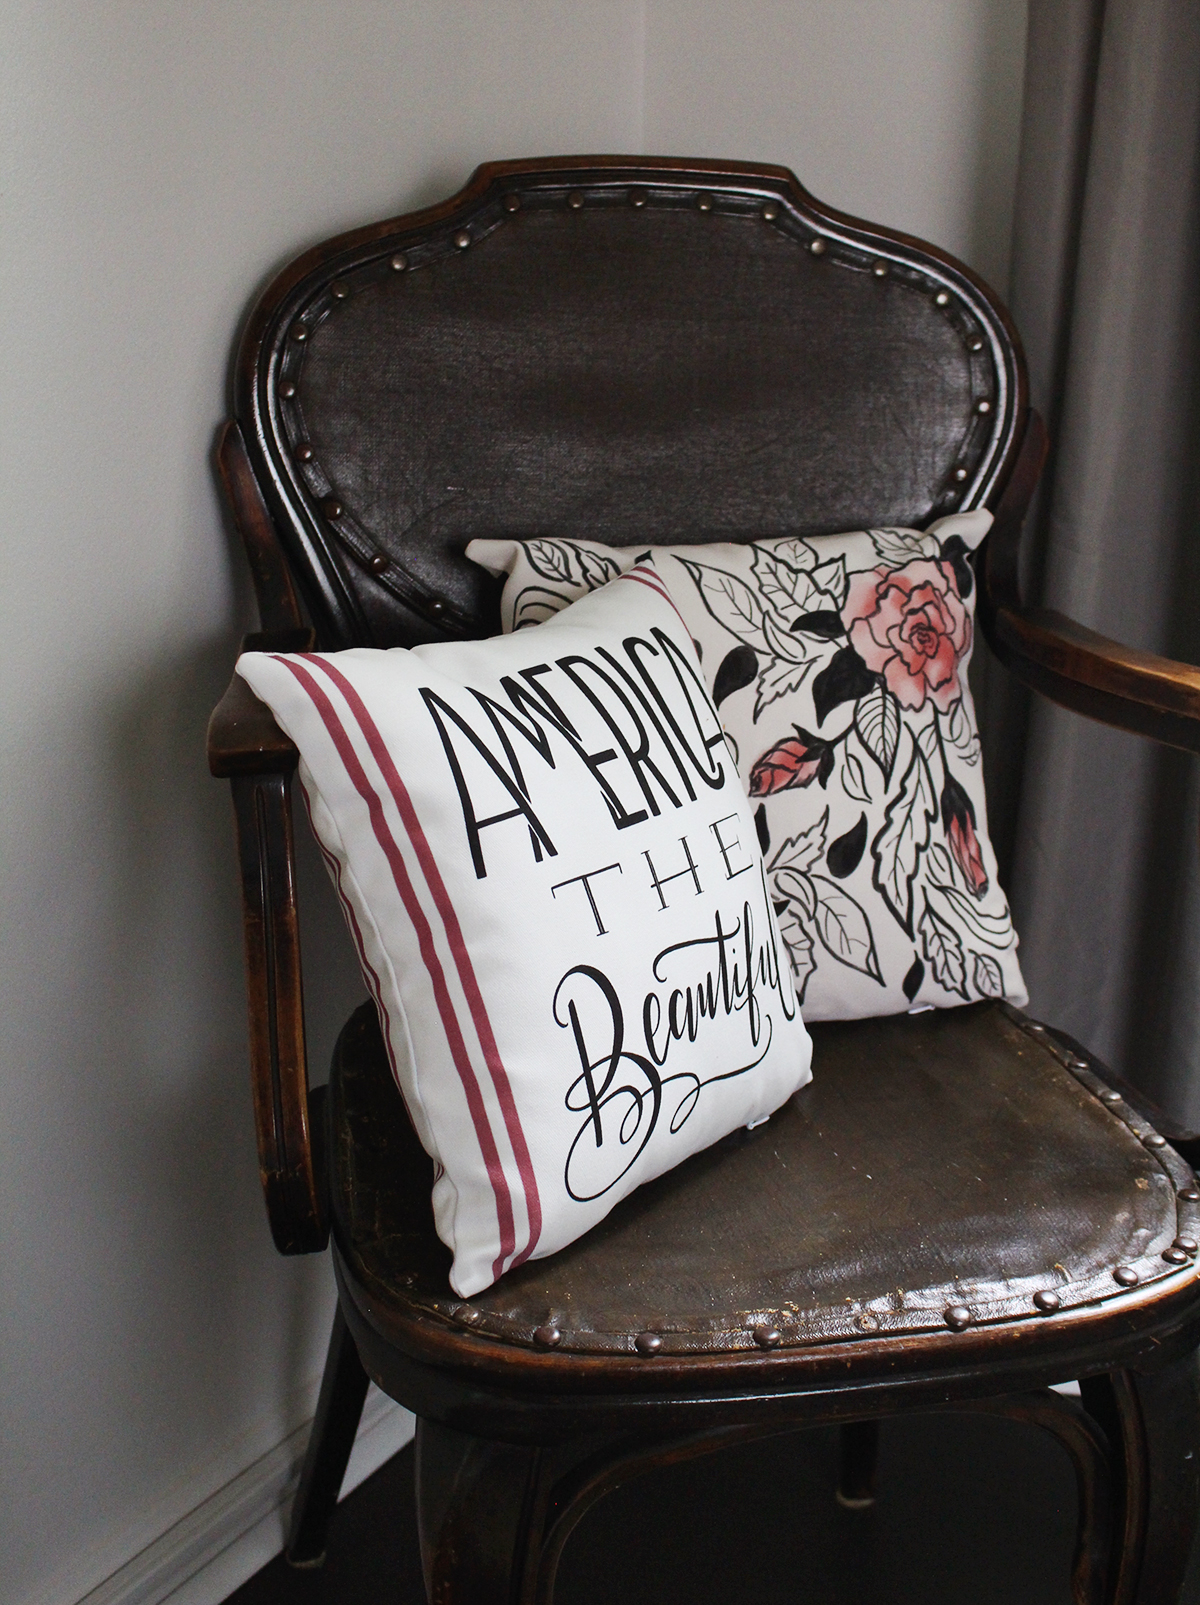 Welcome Summer with this bold hand-lettered collection of prints, canvas and pillows by Lily & Val